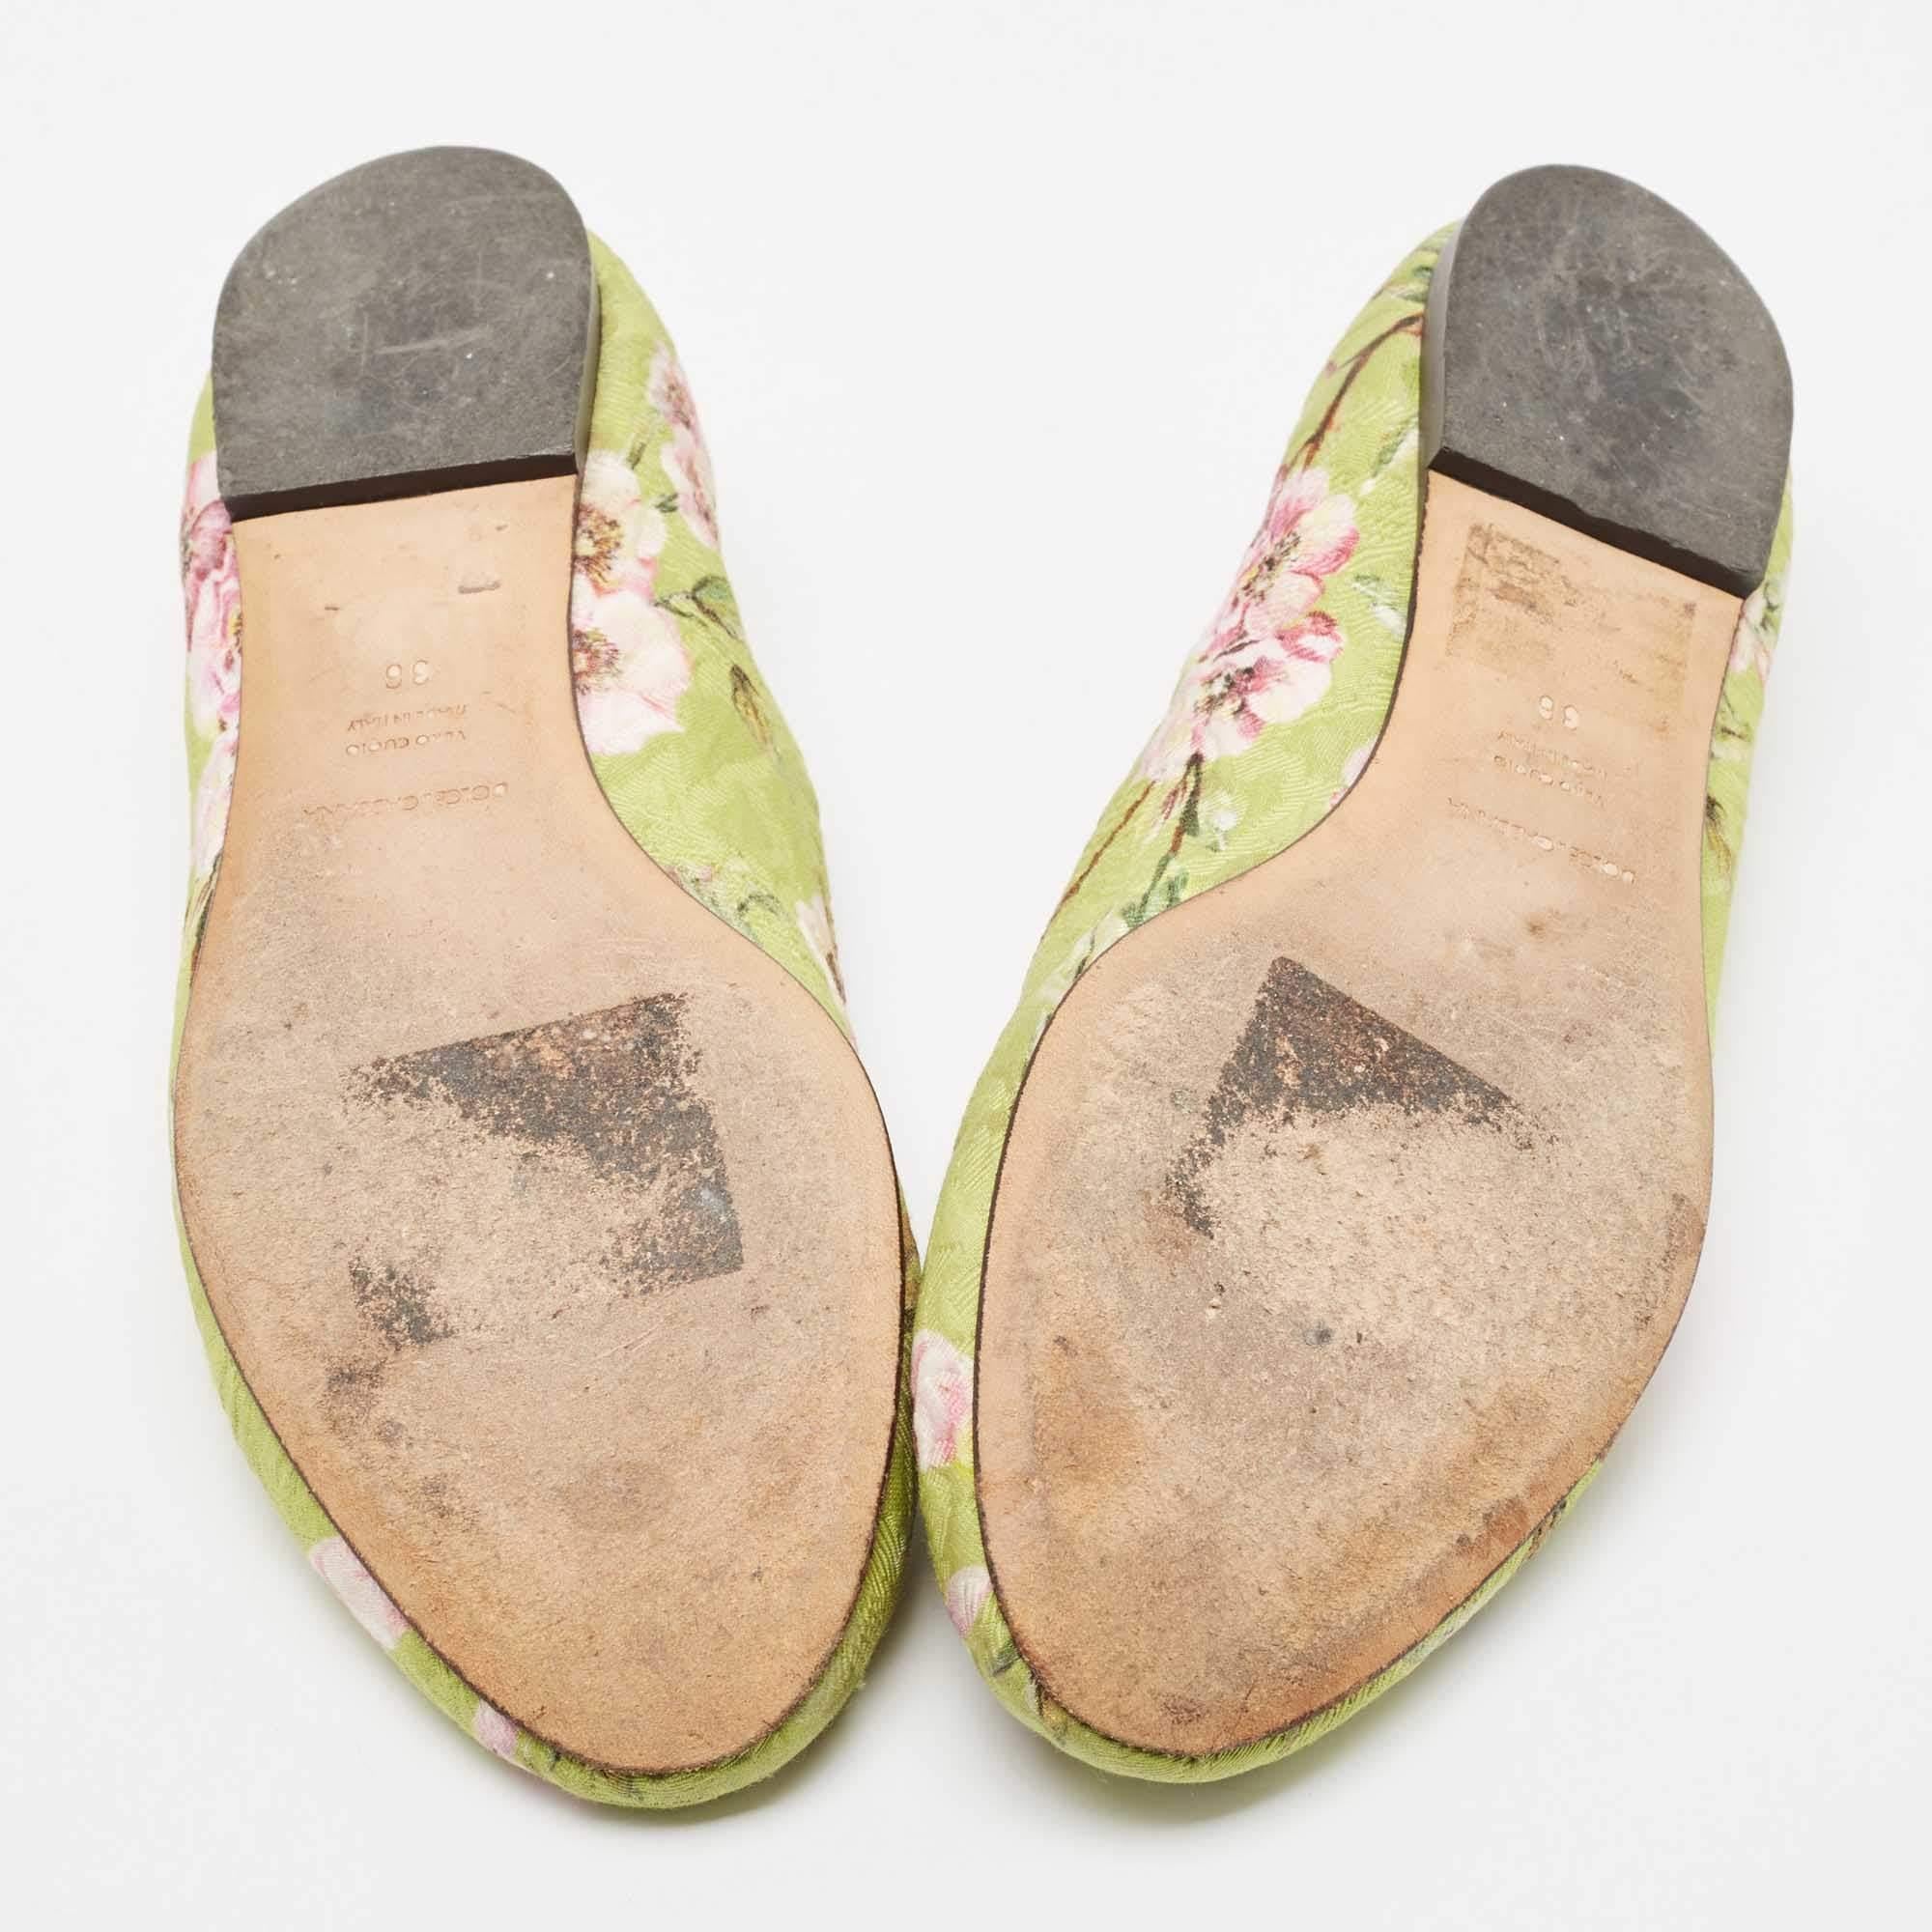 Dolce & Gabbana Multicolor Floral Print Brocade Flat Smoking Slippers Size 36 For Sale 4